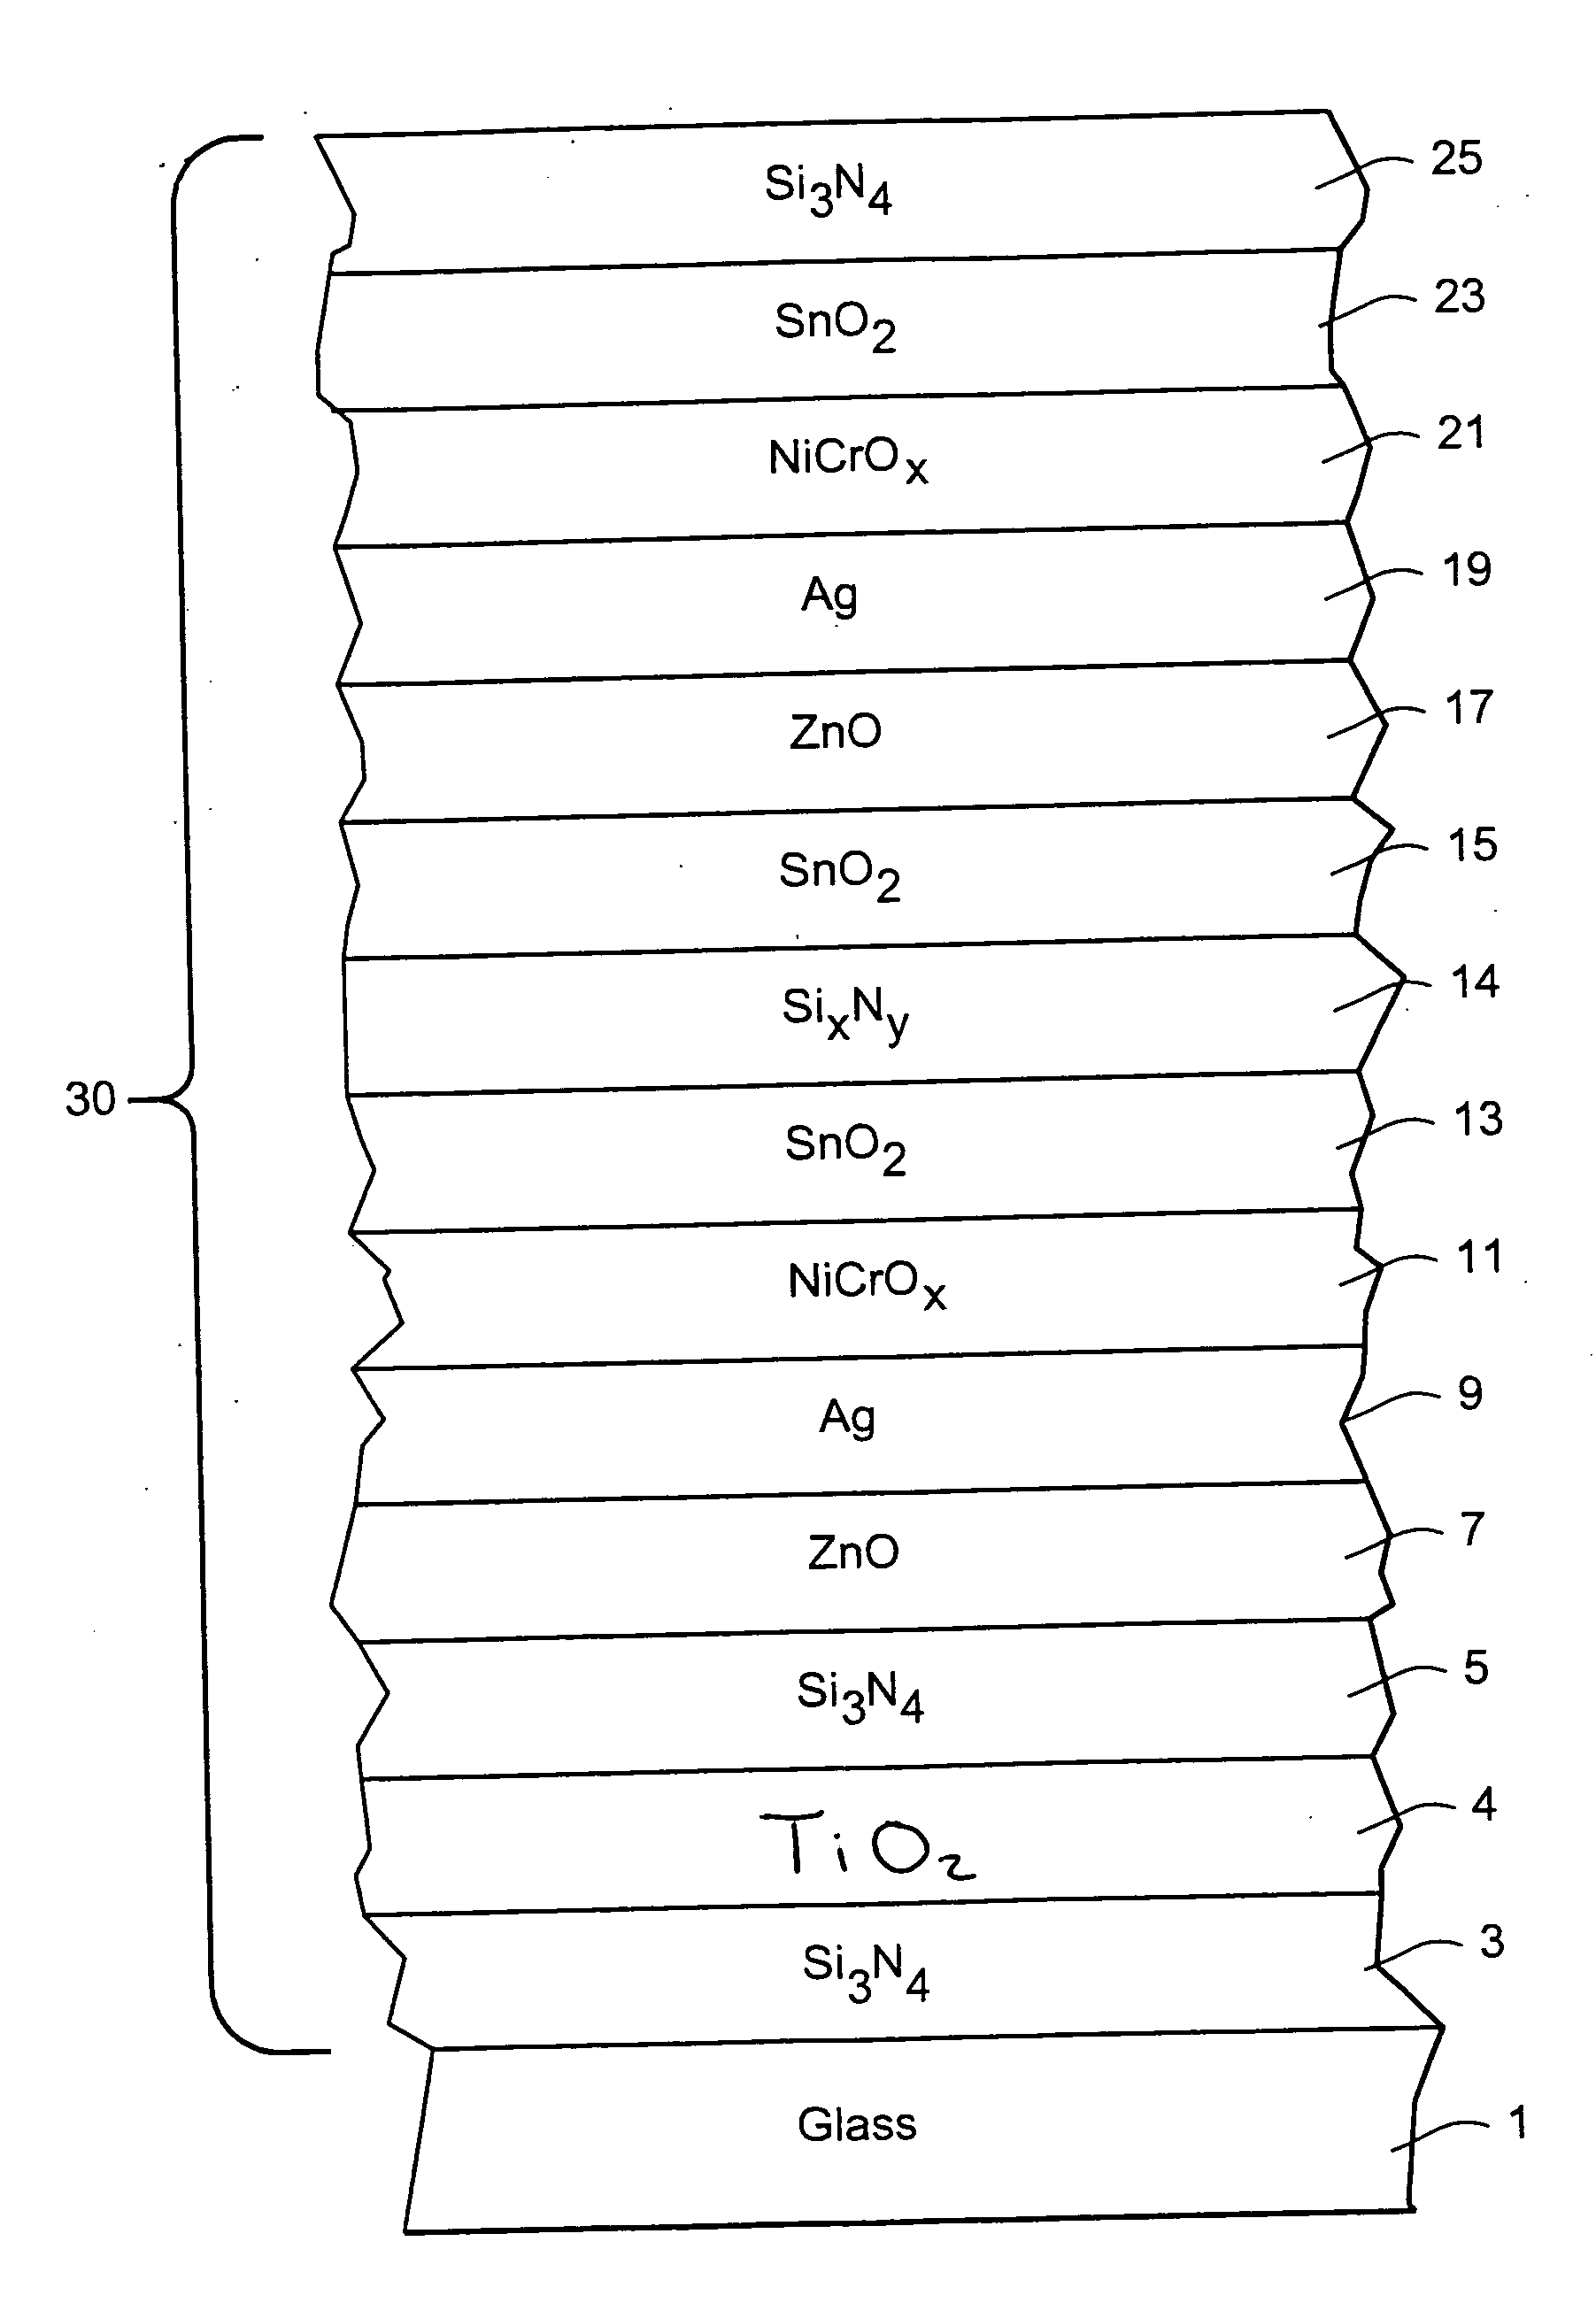 Coated article with low-E coating having titanium oxide layer and/or nicr based layer(s) to improve color values and/or transmission, and method of making same